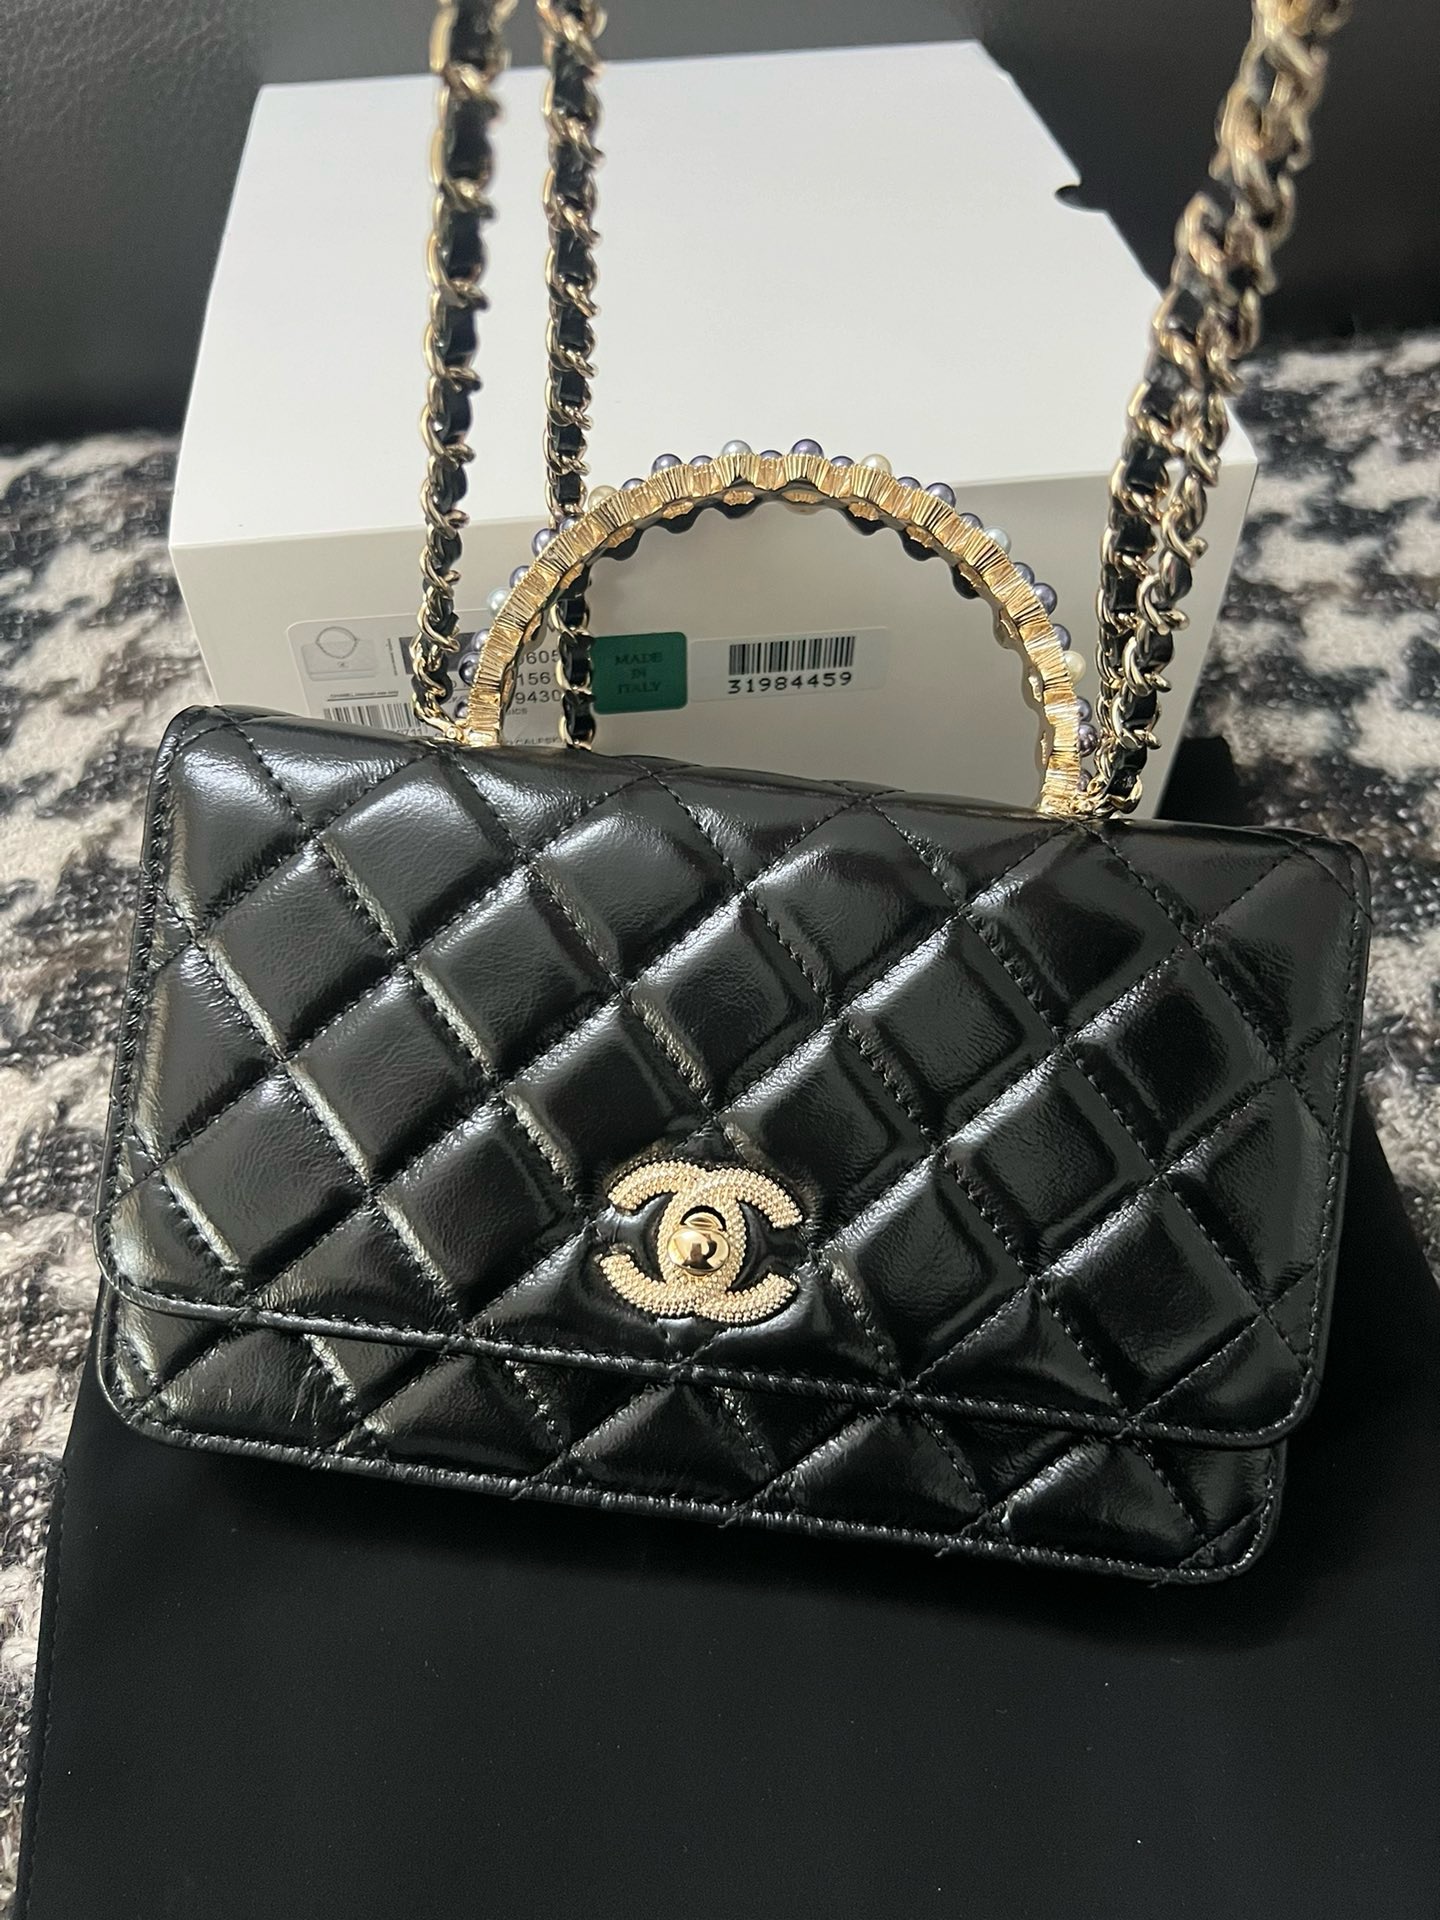 CHANEL FLAP PHONE HOLDER WITH CHAIN AC3566 black